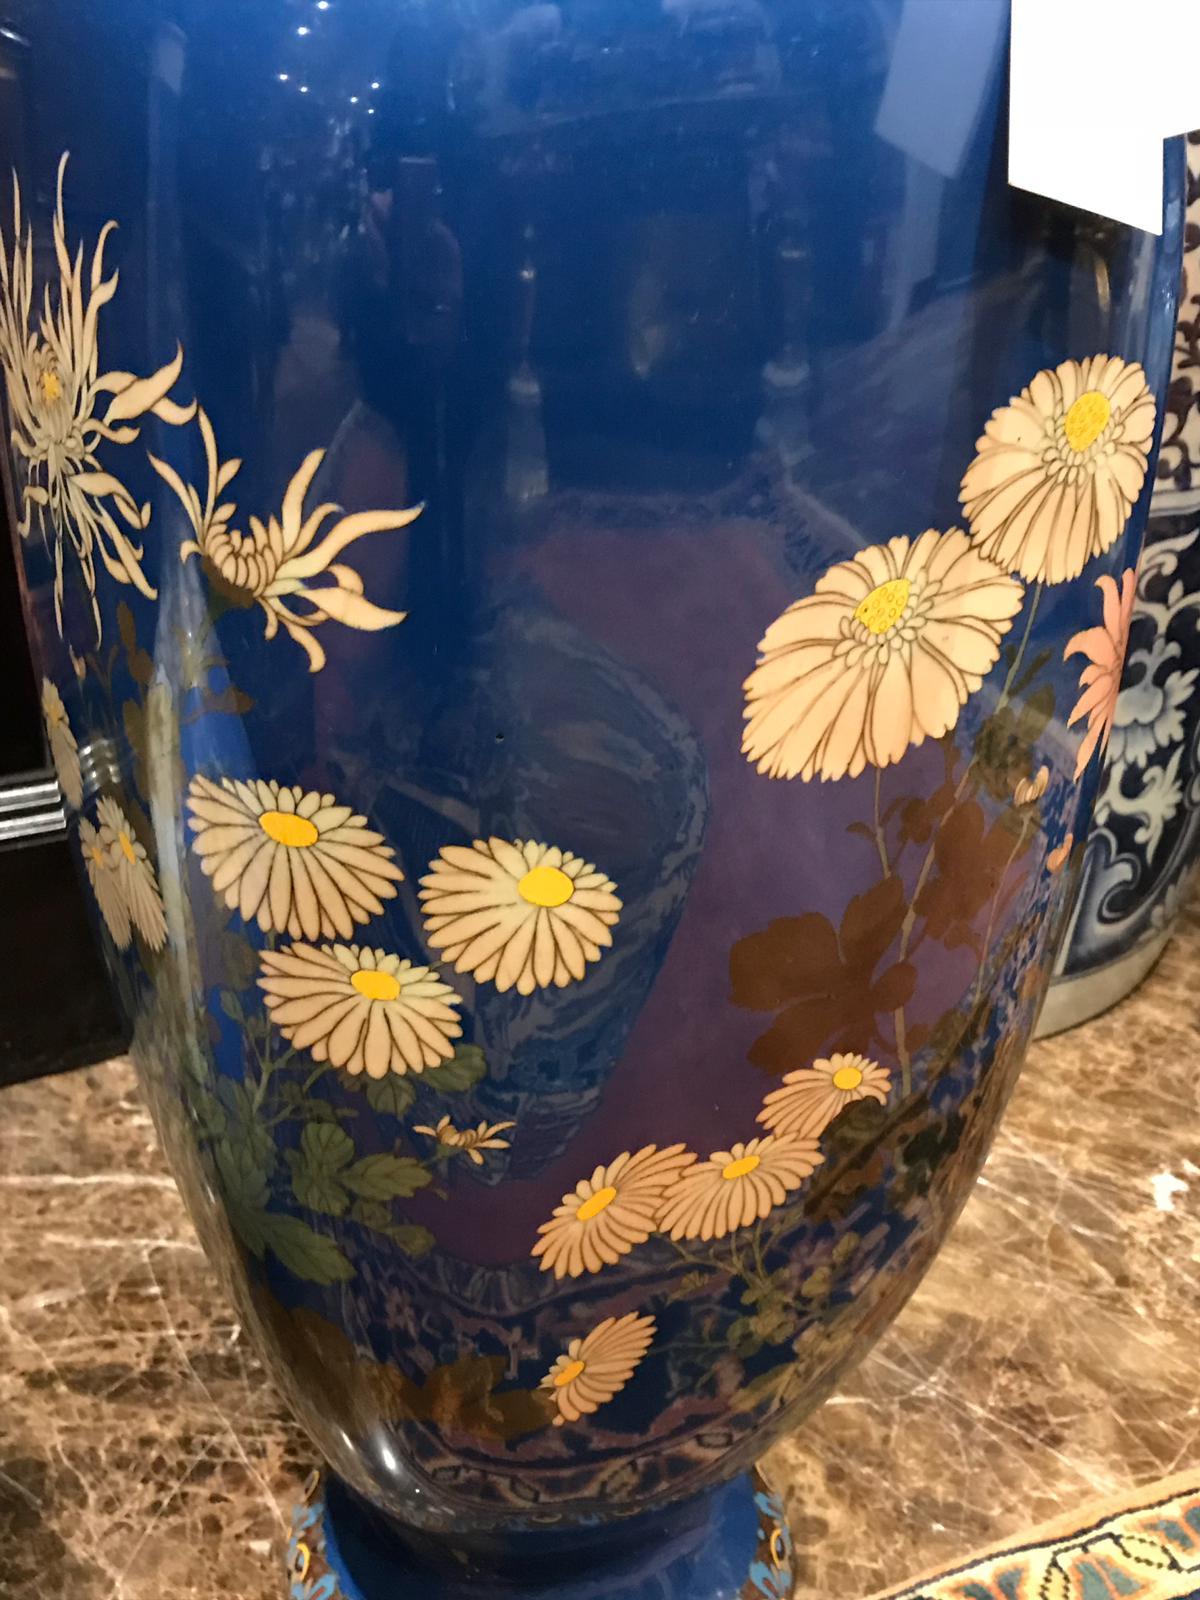 A pair of dark blue cloisonné square shaped tapering vases with flaring necks. Beautiful pair from the Meiji period. They are decorated with depictions of a variety of flowers including: Large white chrysanthemums, pink peonies and other pink and